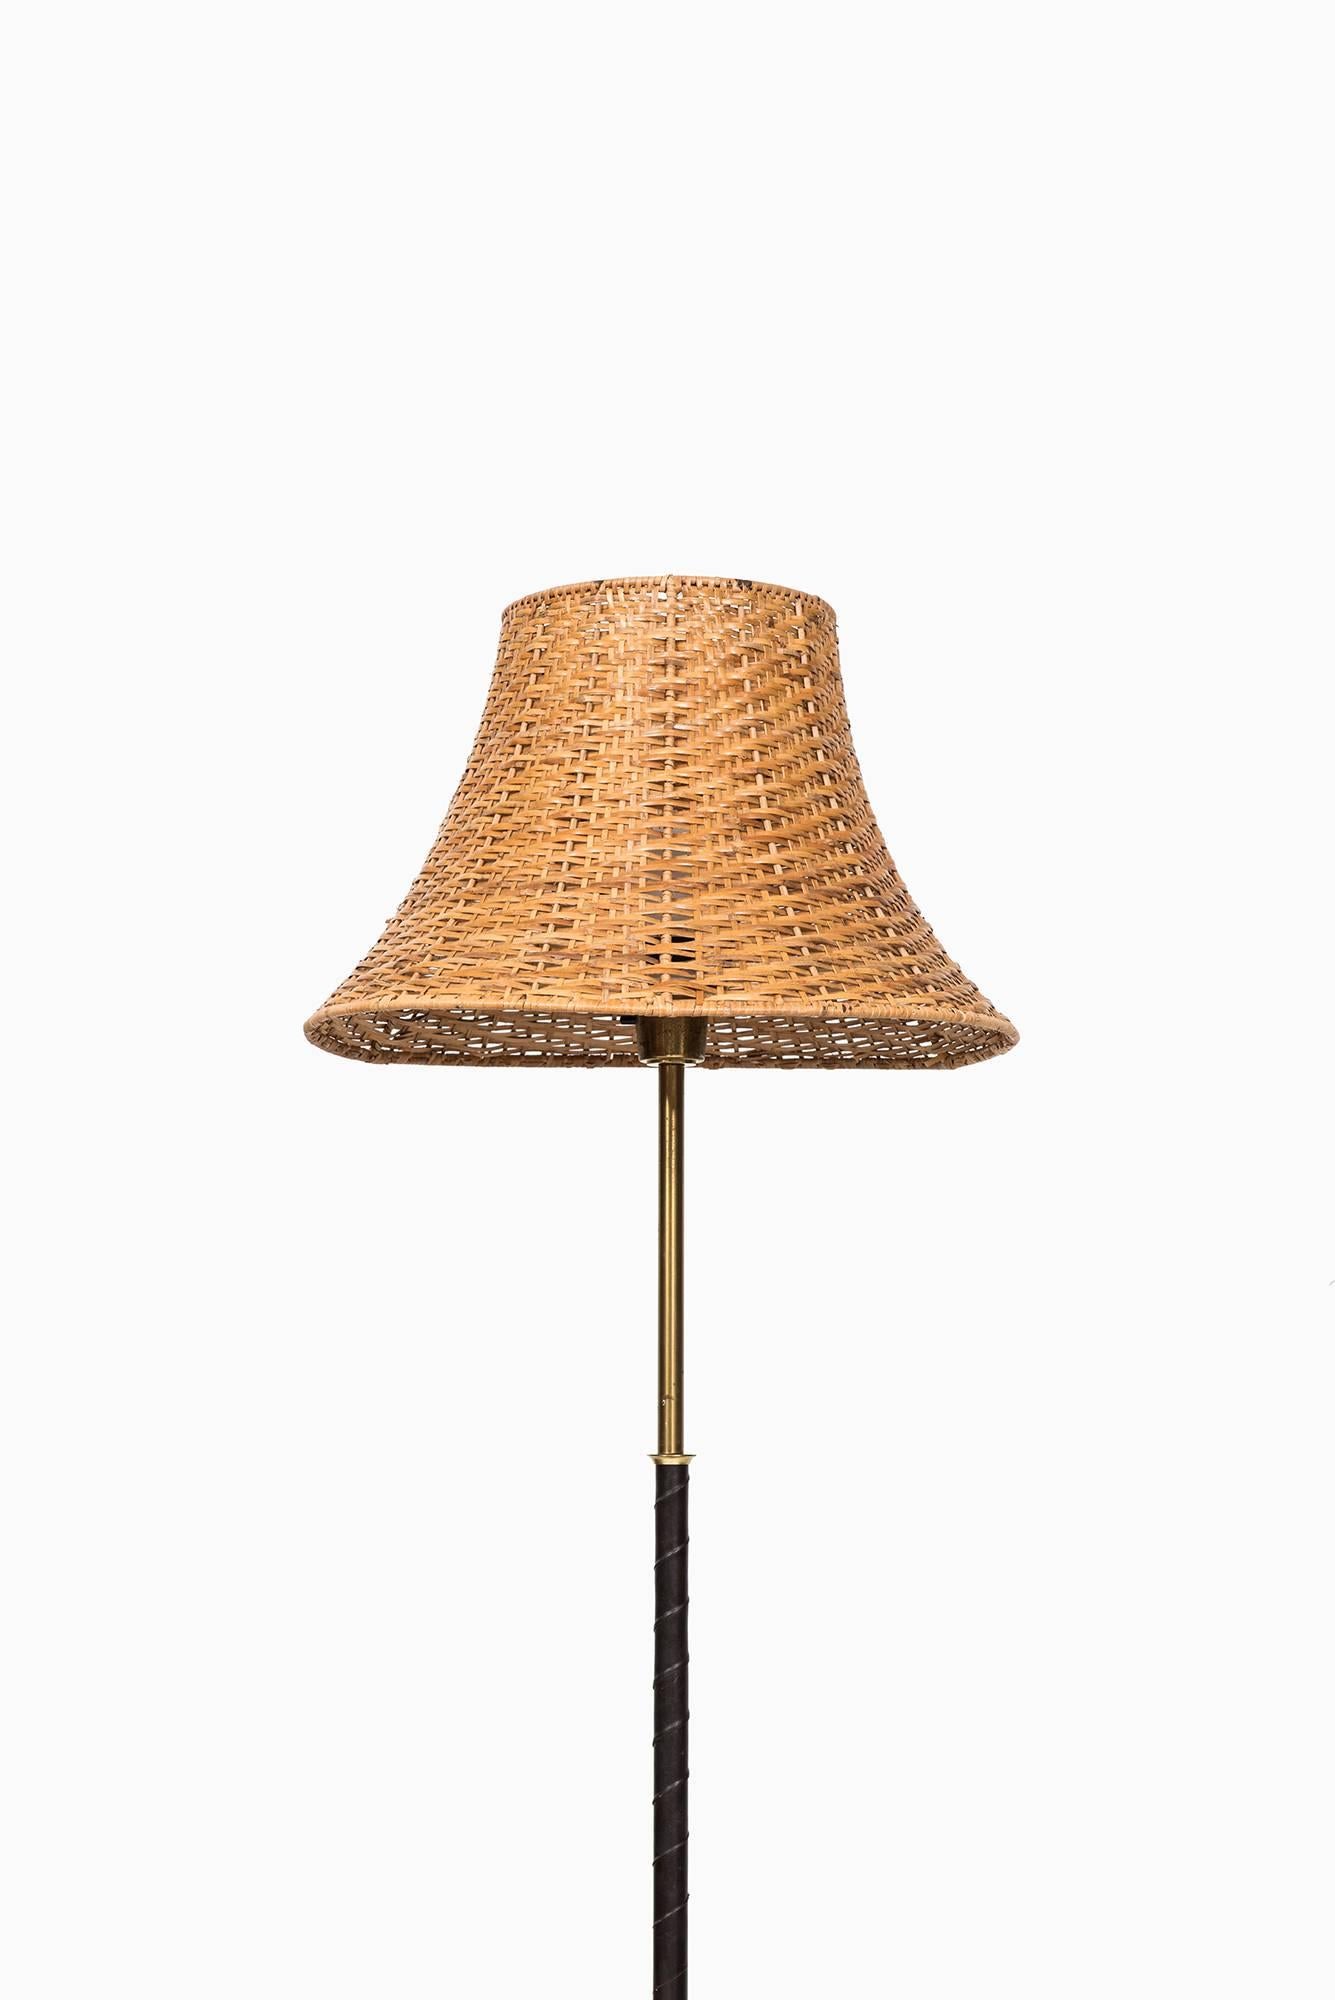 Floor lamp in black leather, brass and woven cane shade. Produced in Sweden.